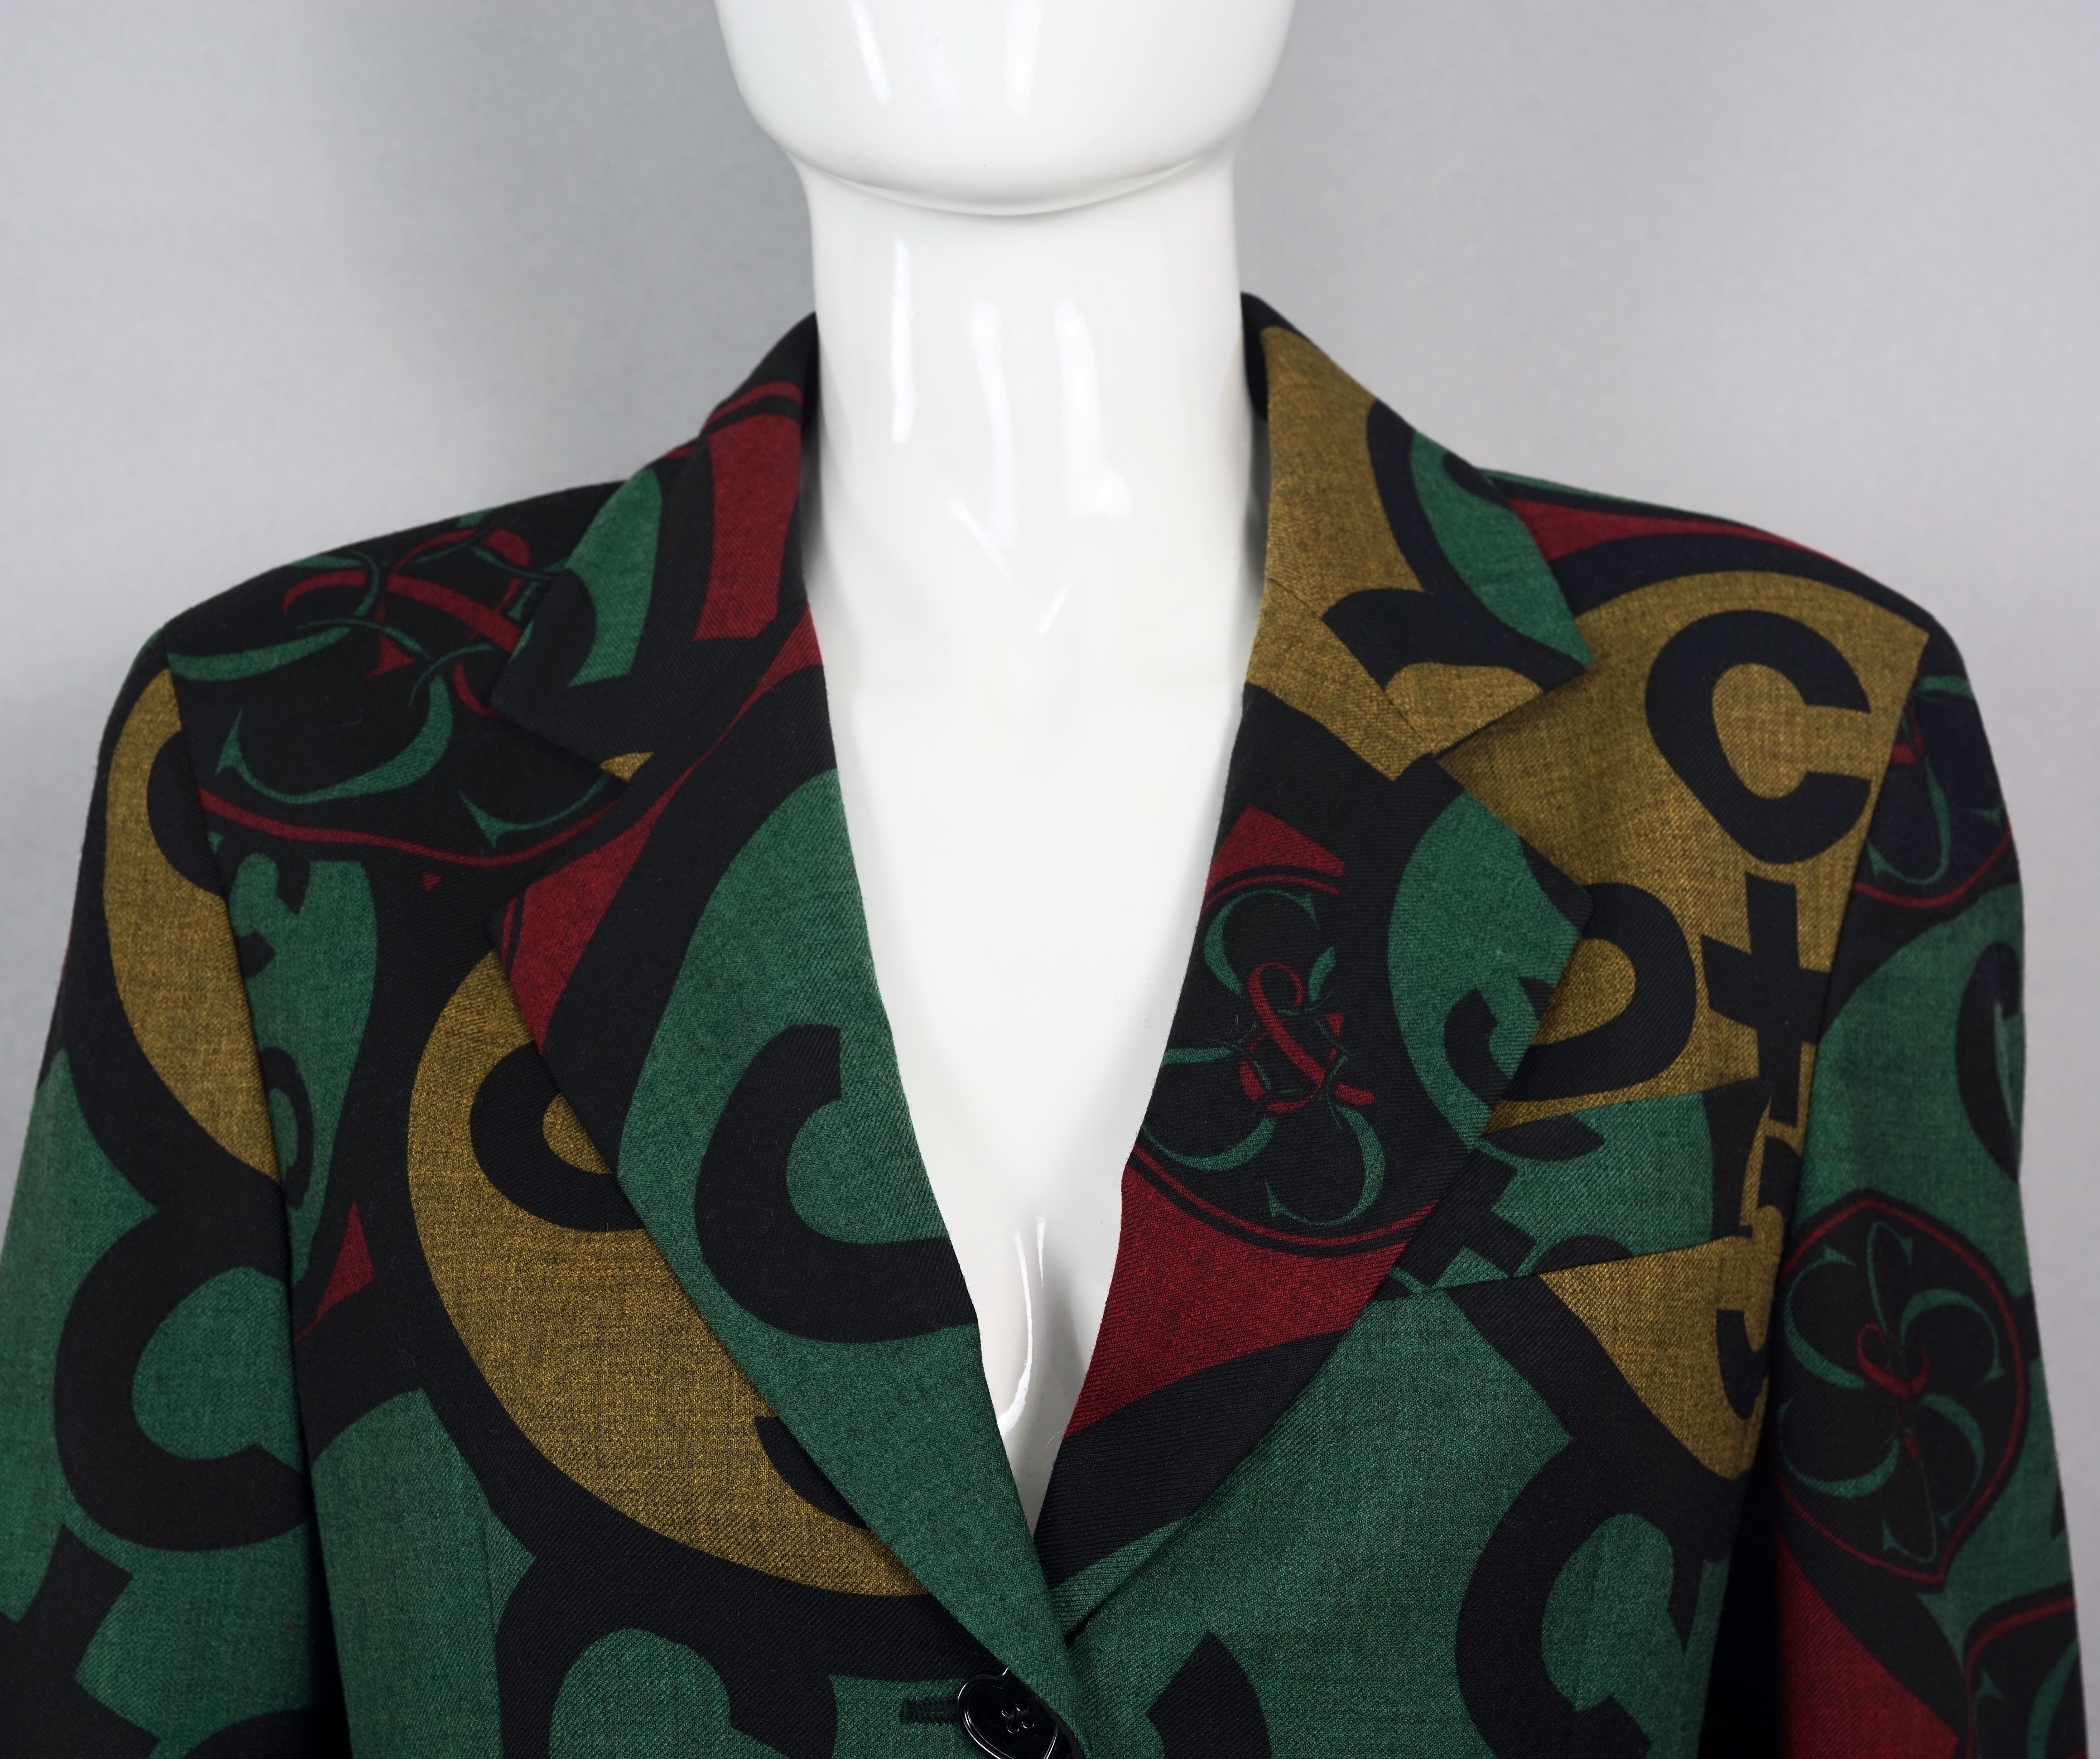 Vintage MOSCHINO CHEAP and CHIC Graphic Print Jacket In Excellent Condition For Sale In Kingersheim, Alsace